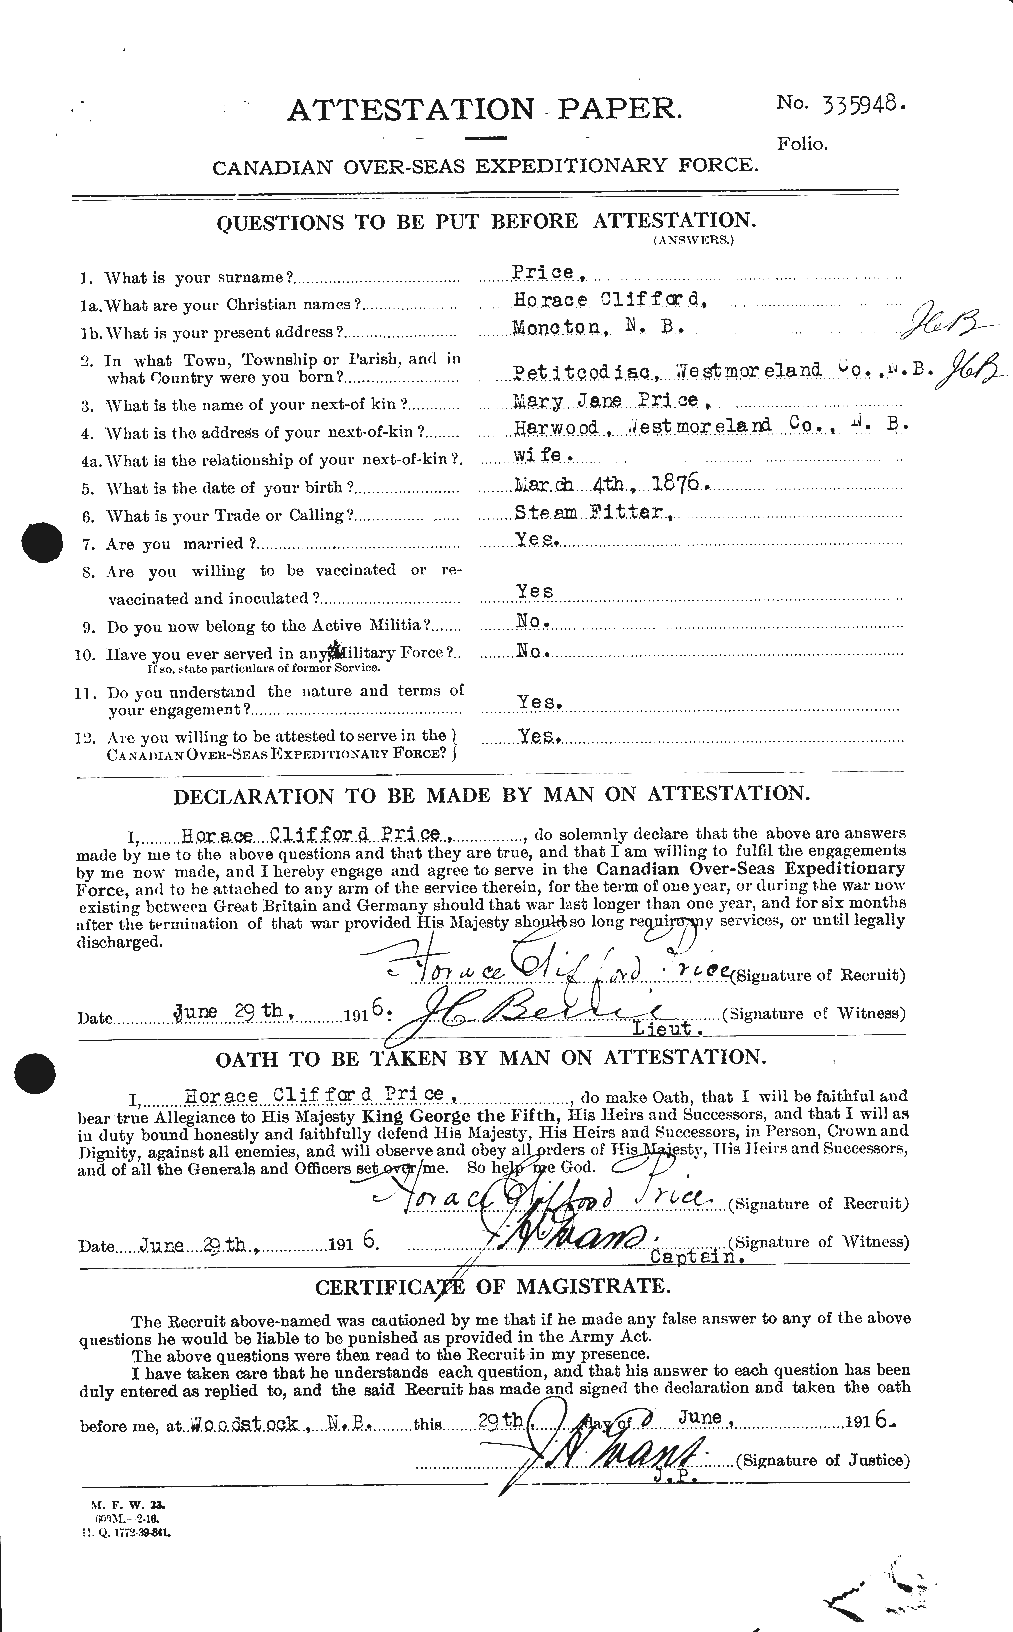 Personnel Records of the First World War - CEF 587179a